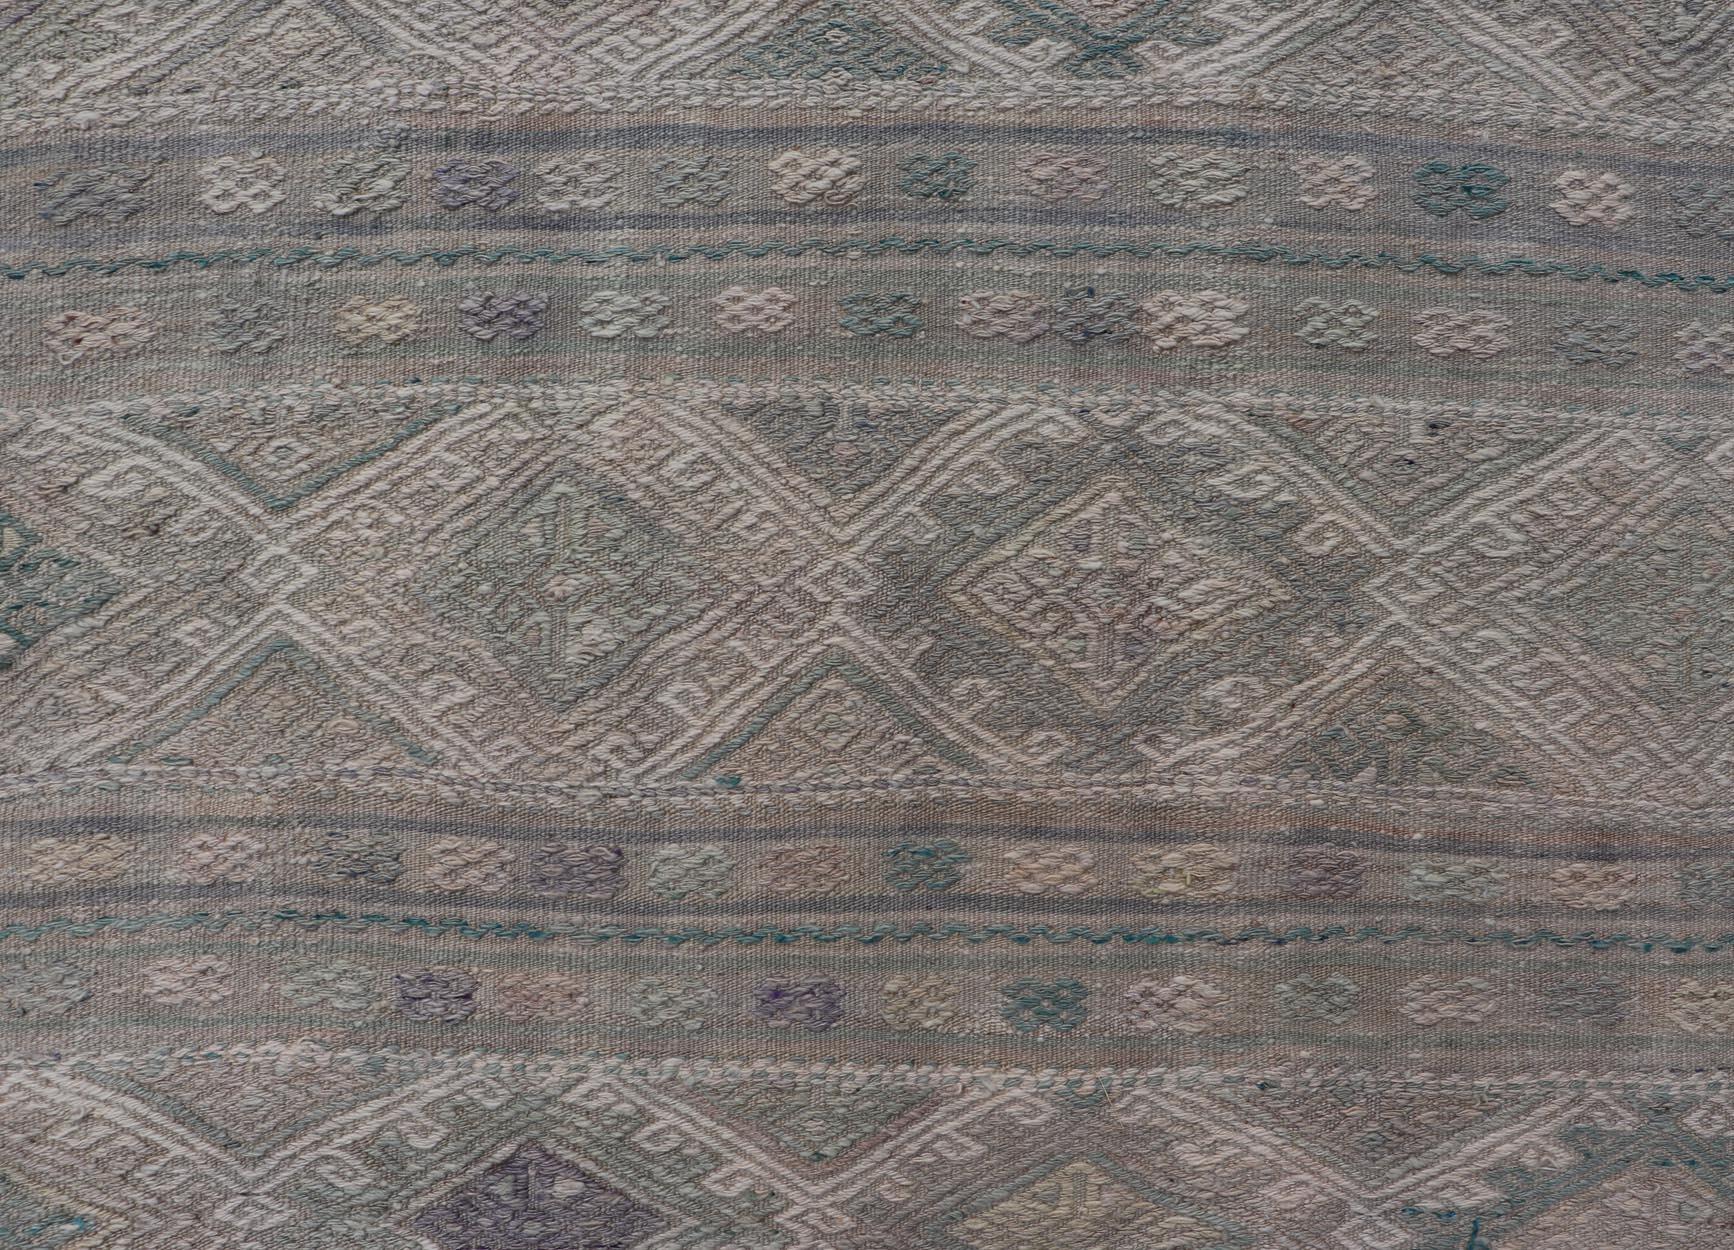 Vintage Turkish Flat-Weave Kilim with Stripes and Embroideries With Gray-Green In Good Condition For Sale In Atlanta, GA